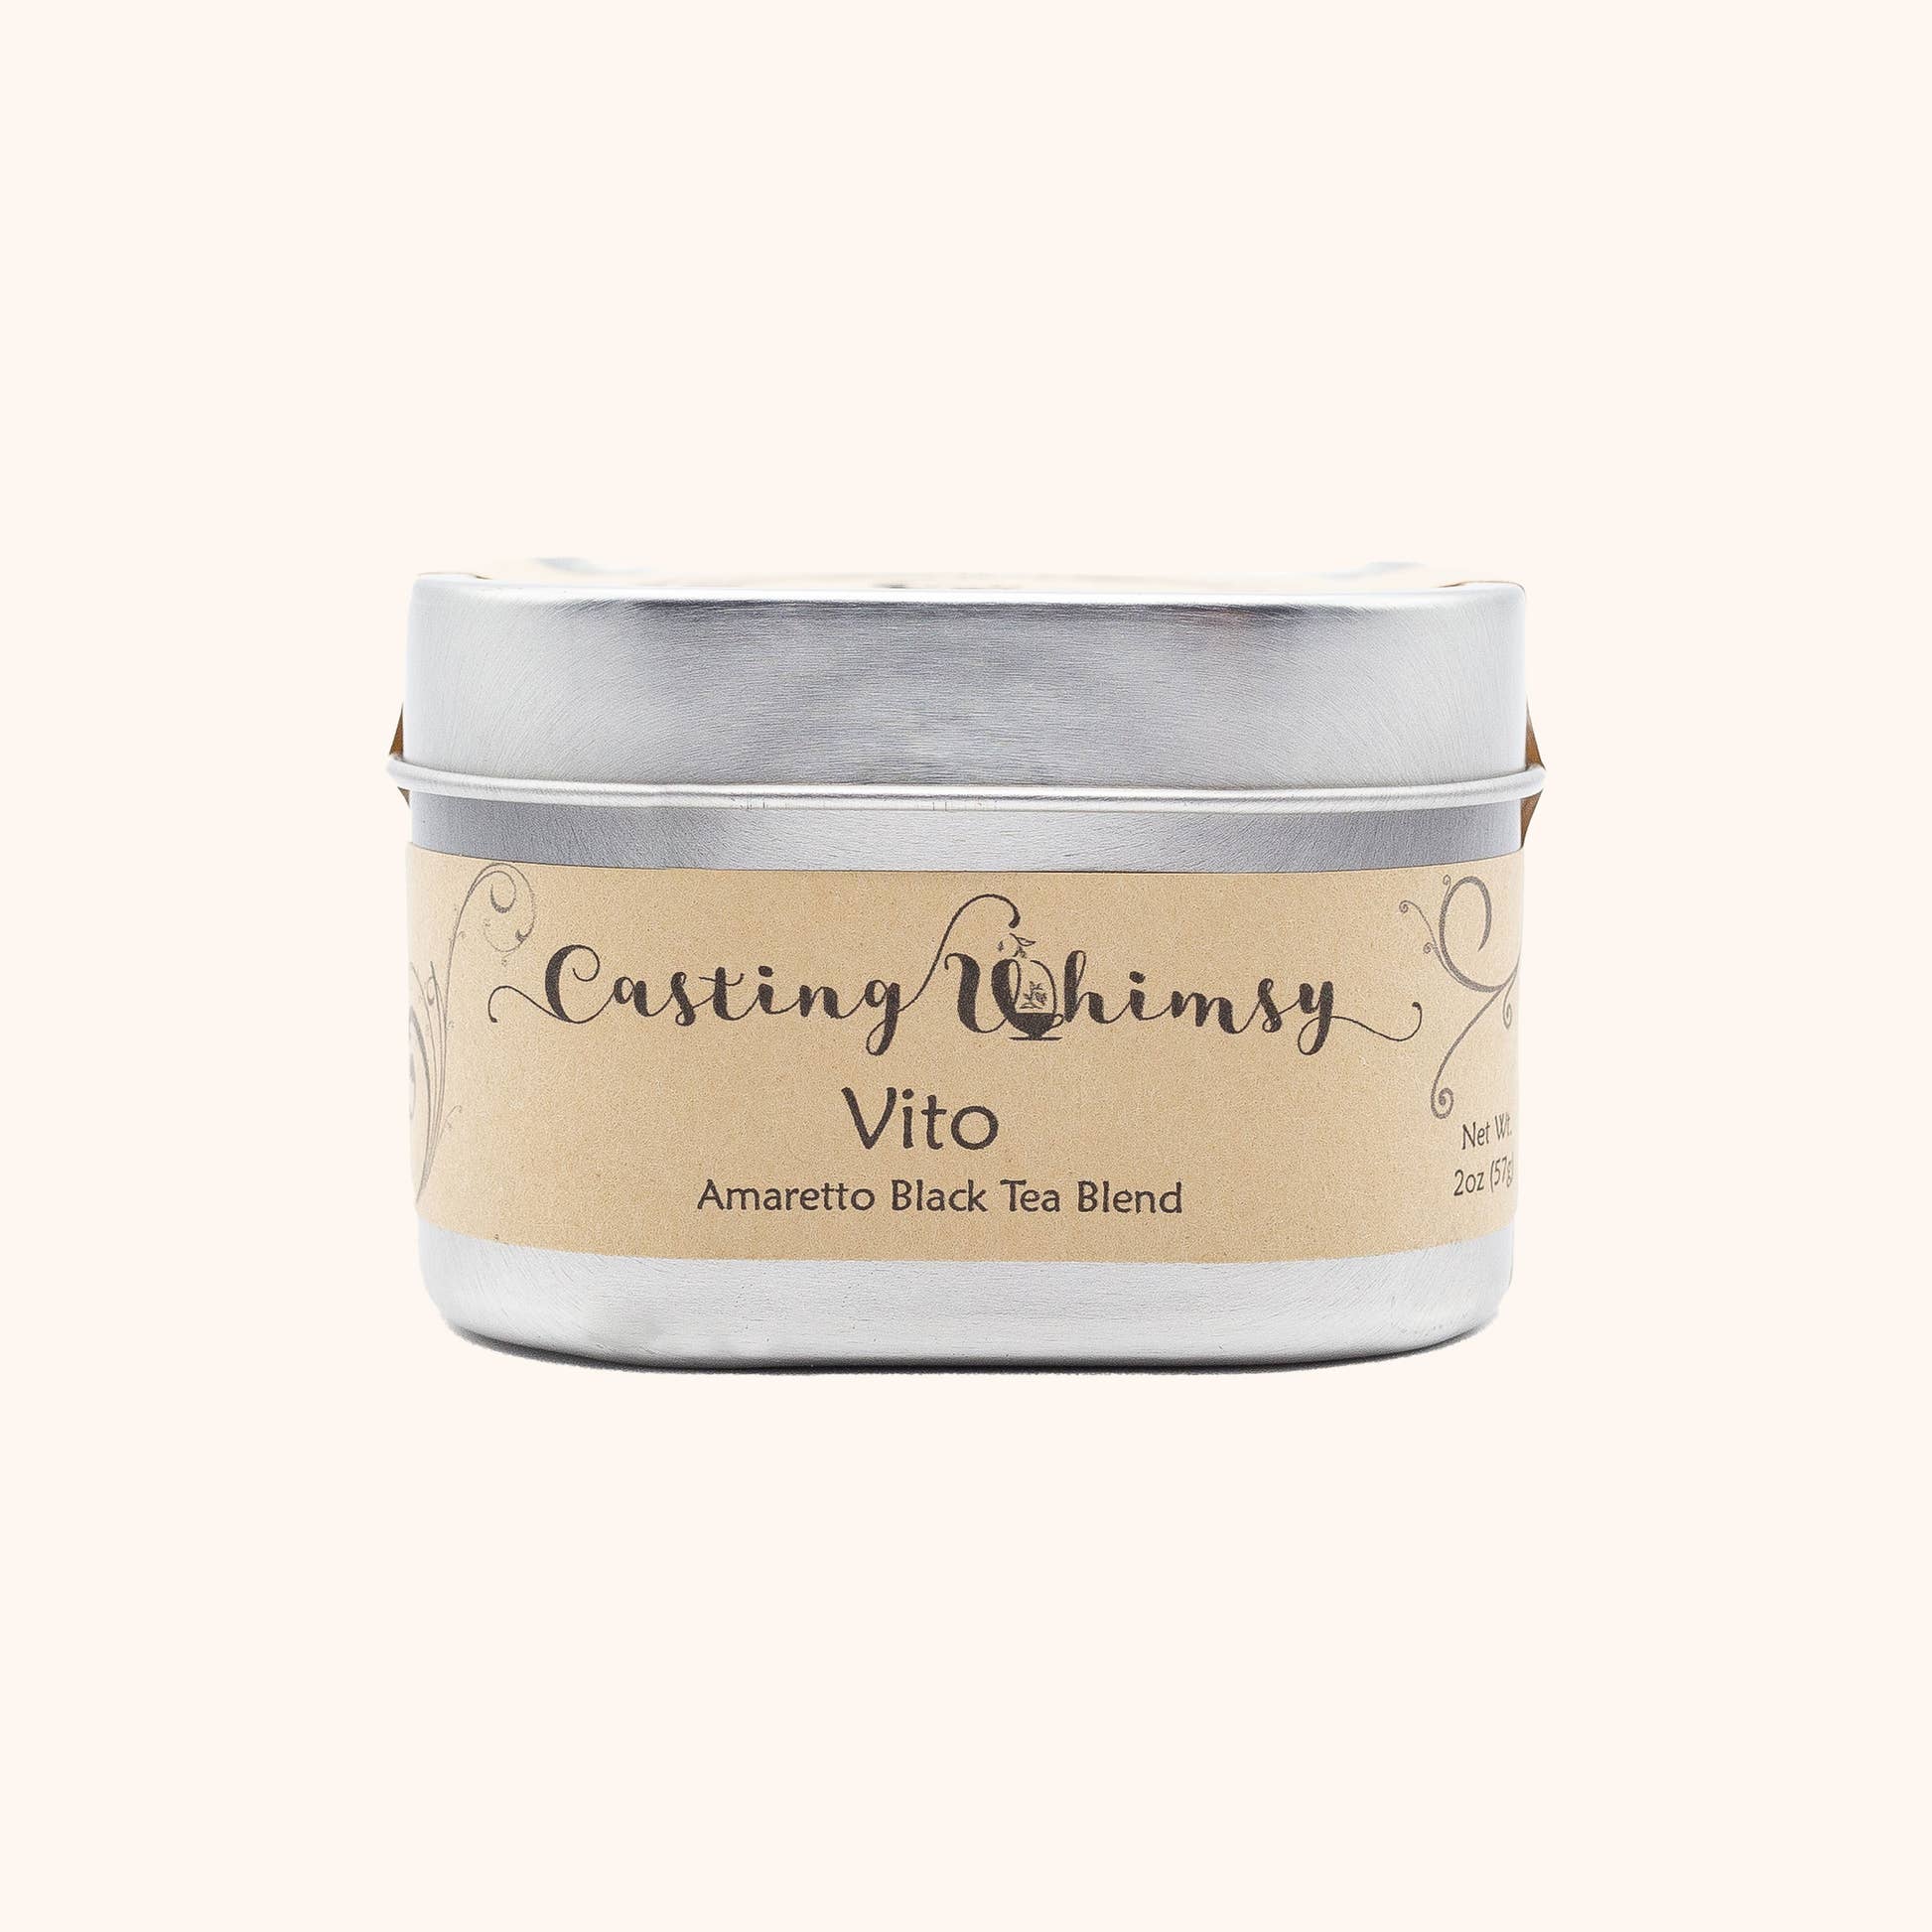 Vito by Casting Whimsy loose leaf tea tin